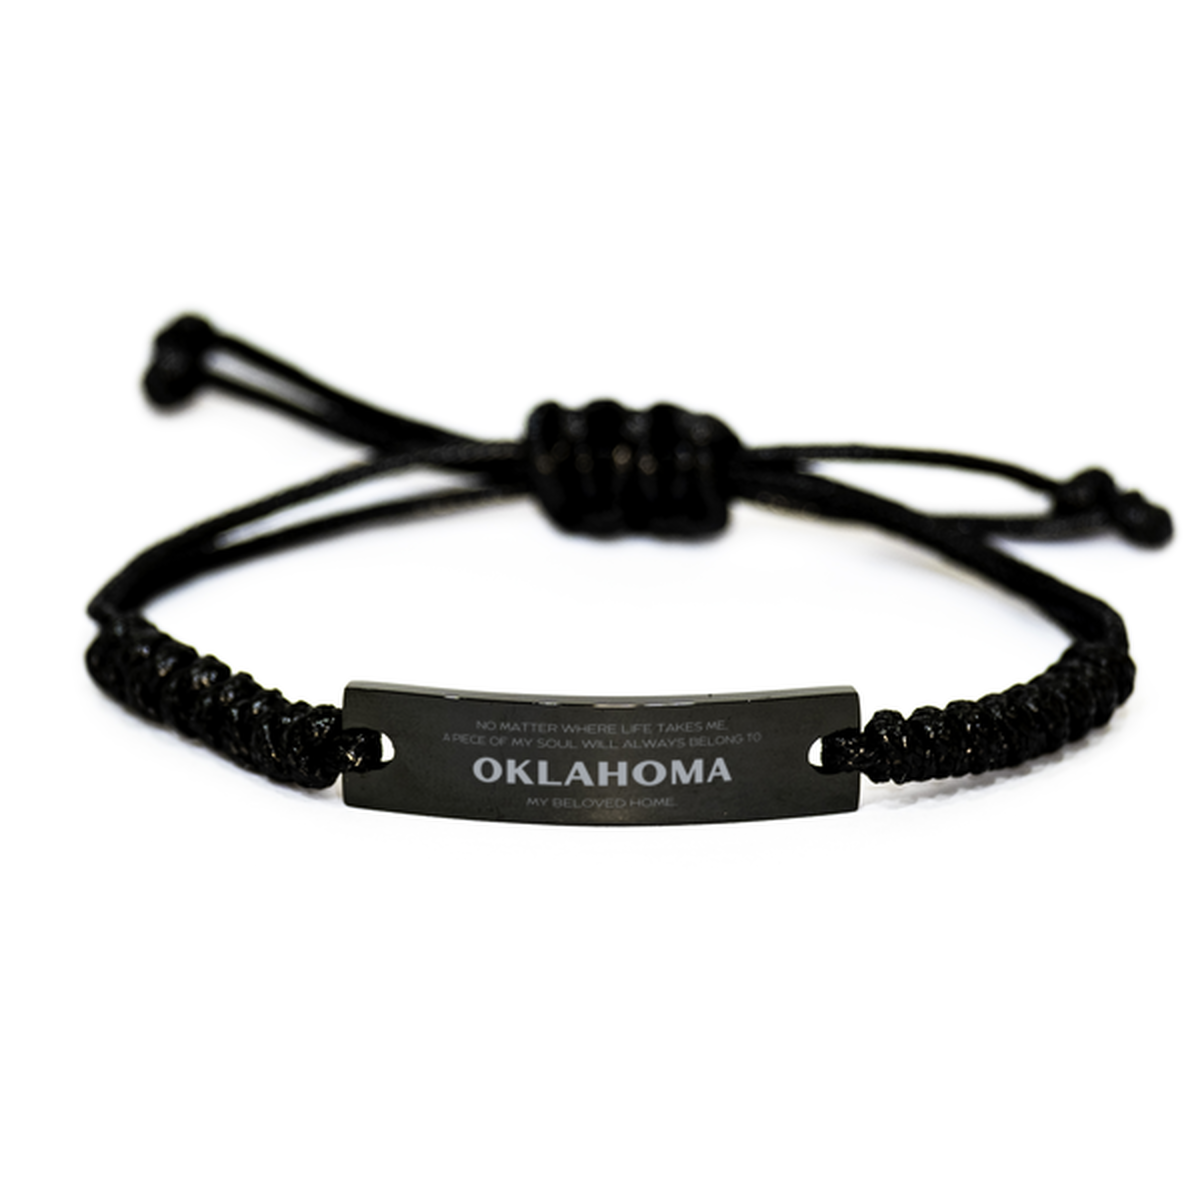 Love Oklahoma State Gifts, My soul will always belong to Oklahoma, Proud Black Rope Bracelet, Birthday Unique Gifts For Oklahoma Men, Women, Friends